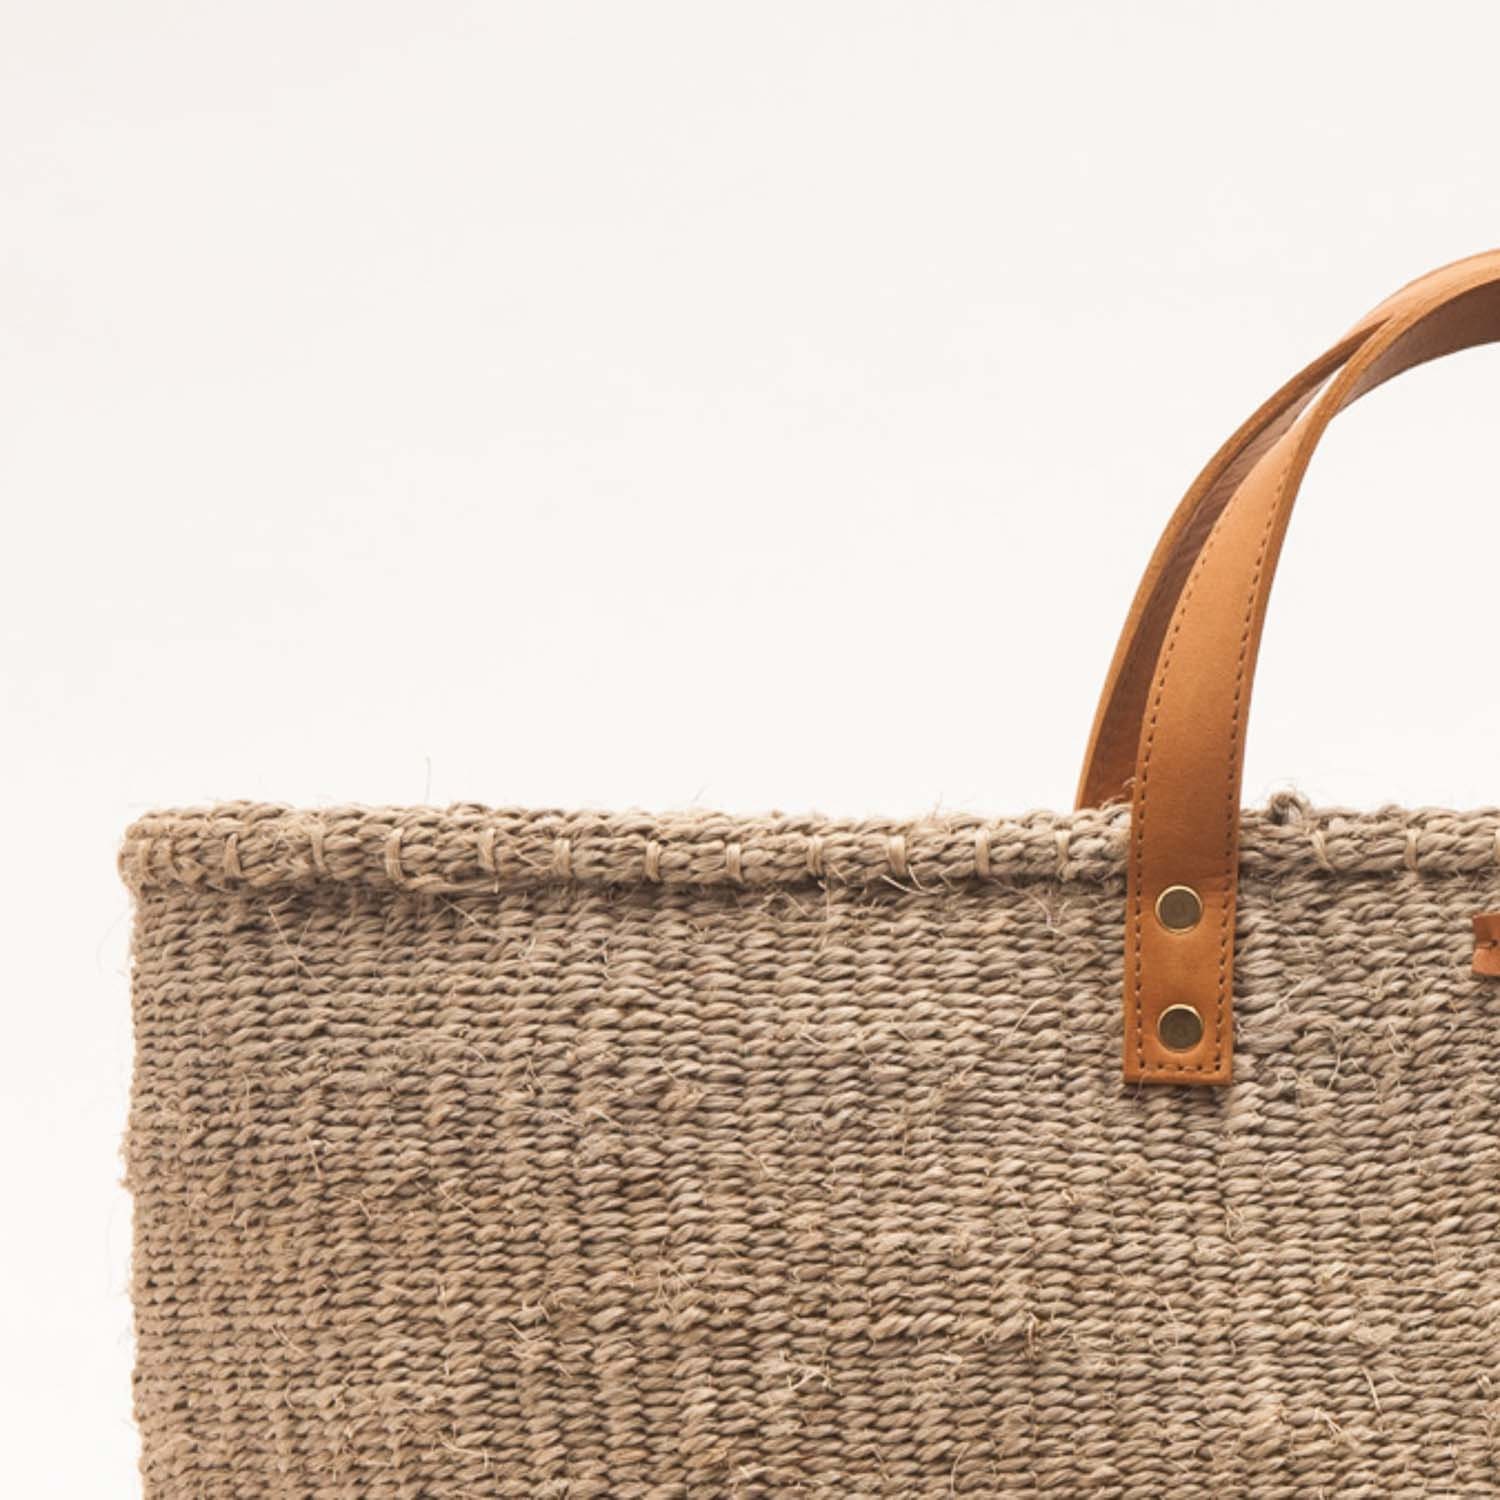 Brown & Grey Woven Shopper. Two Tone Basket Bag With Leather - Etsy UK